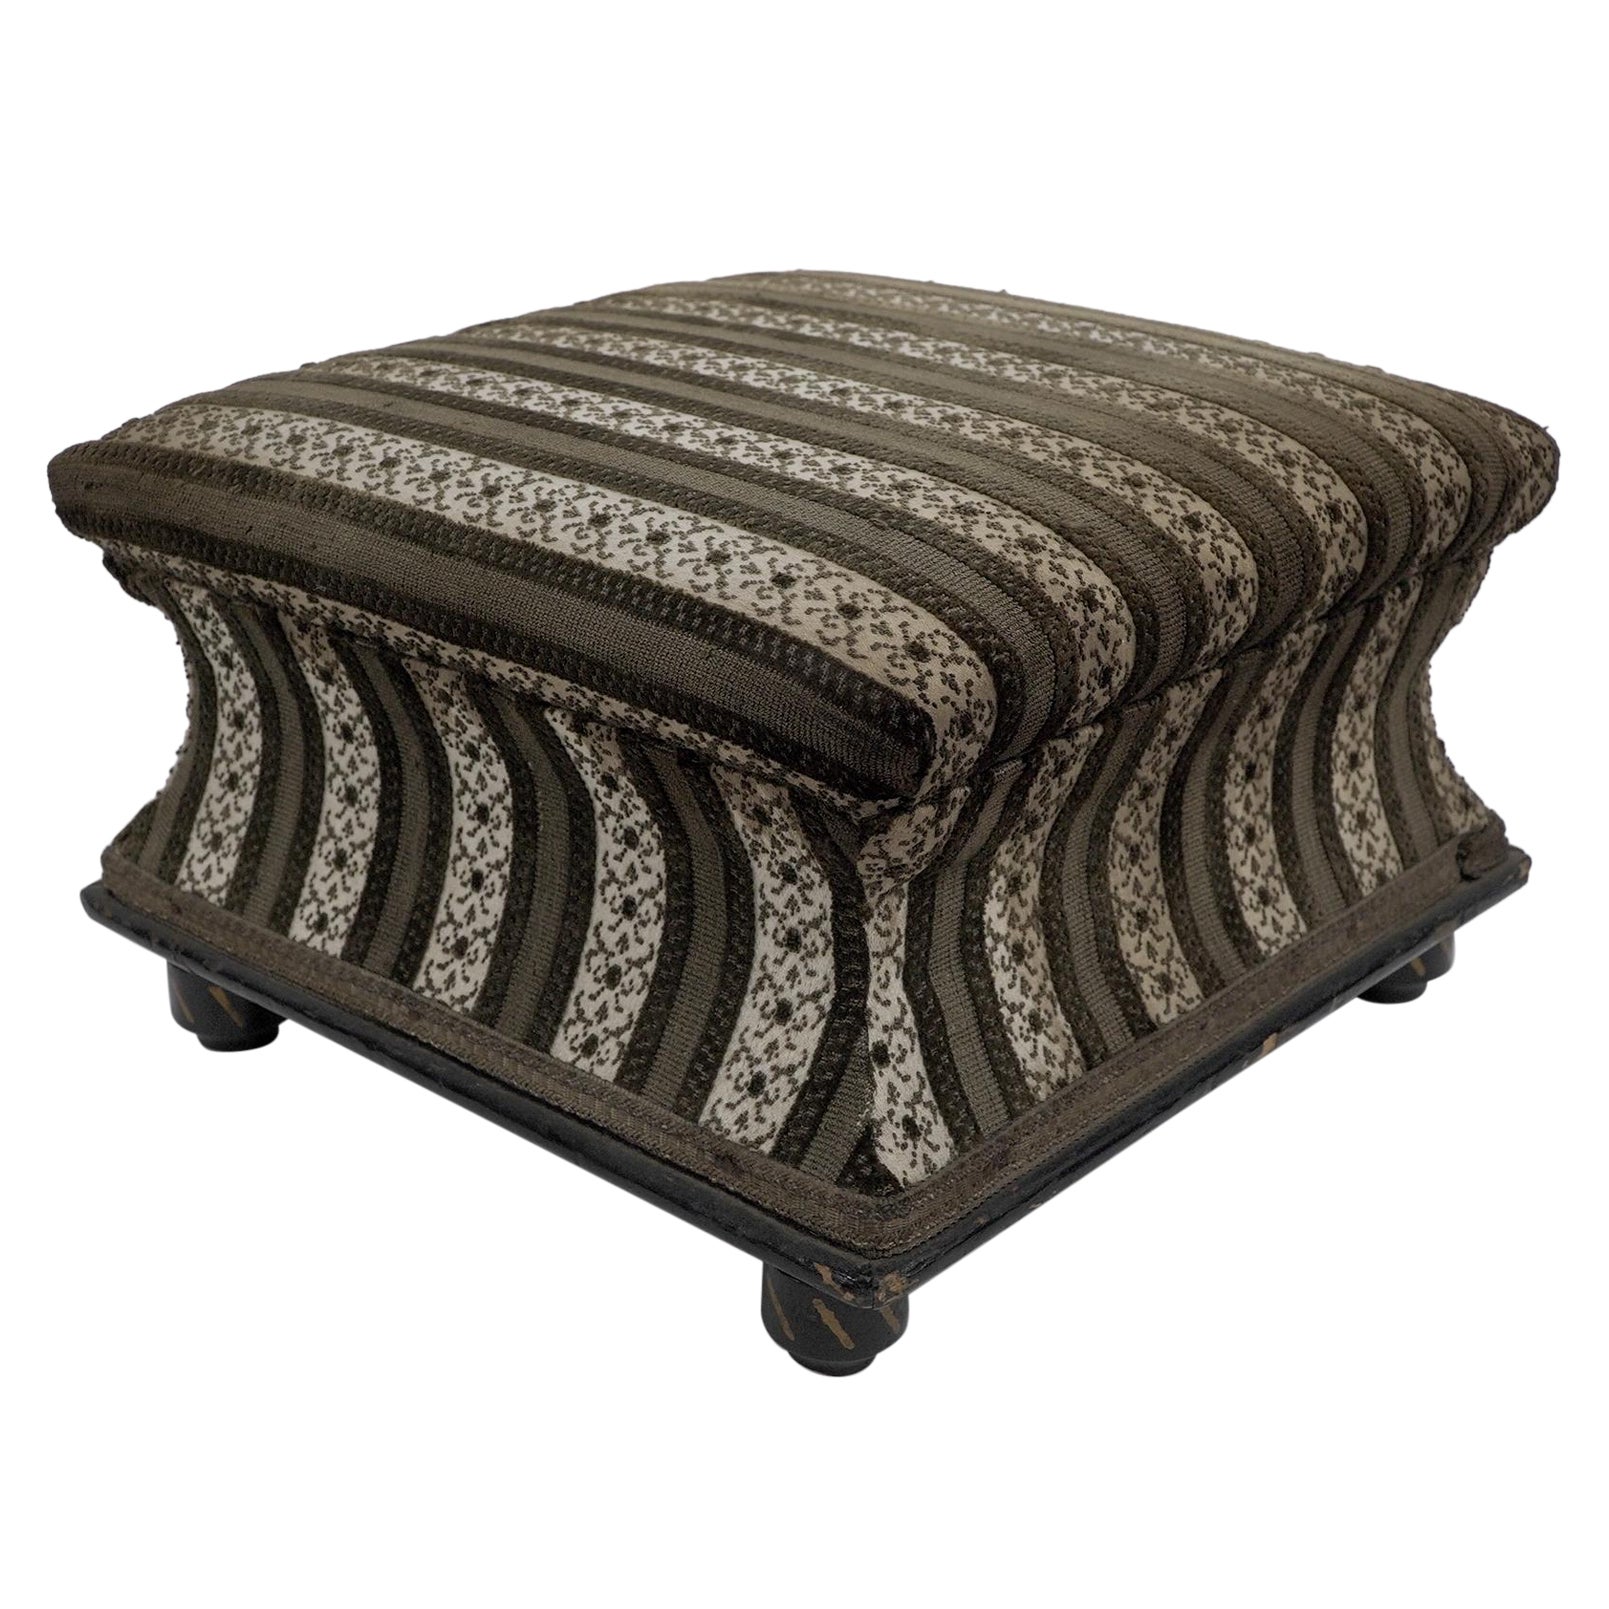 An Aesthetic Movement ebonized & gilded foot stool with striped upholstery. For Sale